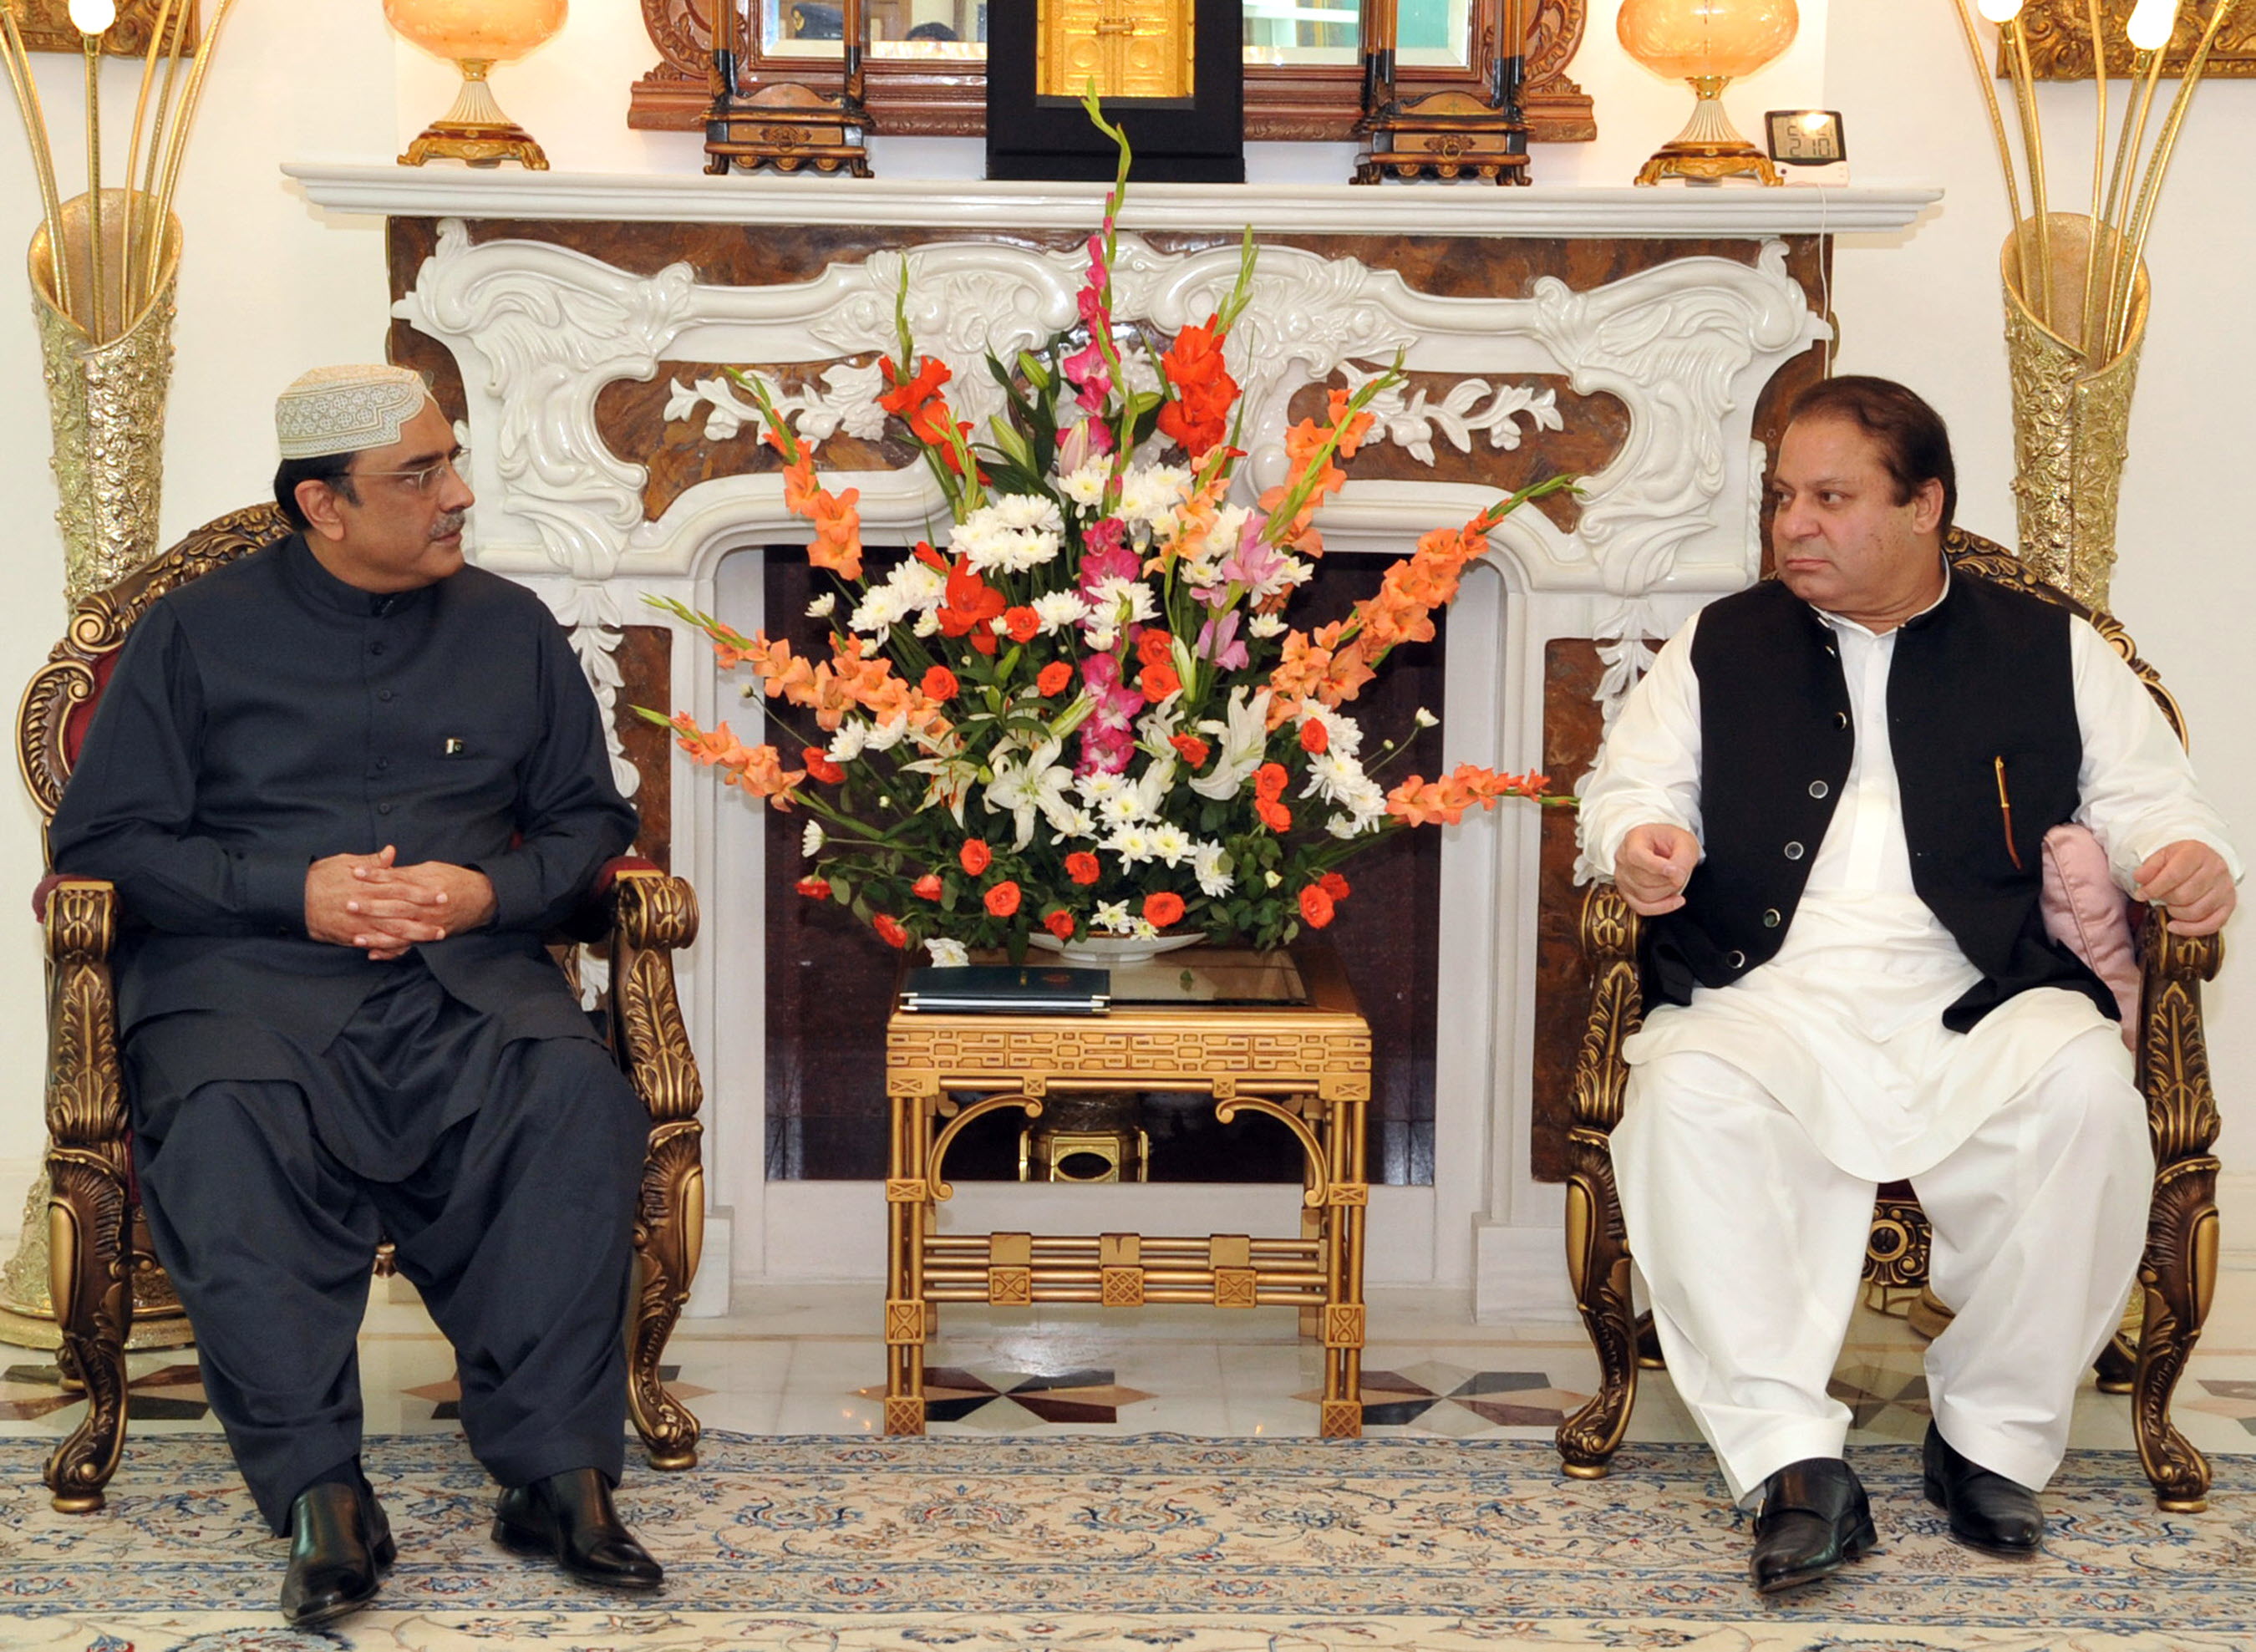 This handout picture released by the Pakistan Muslim League-Nawaz shows Pakistani President Asif Ali Zardari (L) talking with former prime minister Nawaz Sharif (R) during a meeting in Lahore on July 17, 2009. A Pakistan court quashed convictions against Sharif for plane hijacking and terrorism, clearing the way for a full return to public office for the opposition leader. RESTRICTED TO EDITORIAL USE   GETTY OUT     AFP PHOTO/HO/PAKISTAN MUSLIM LEAGUE-NAWAZ